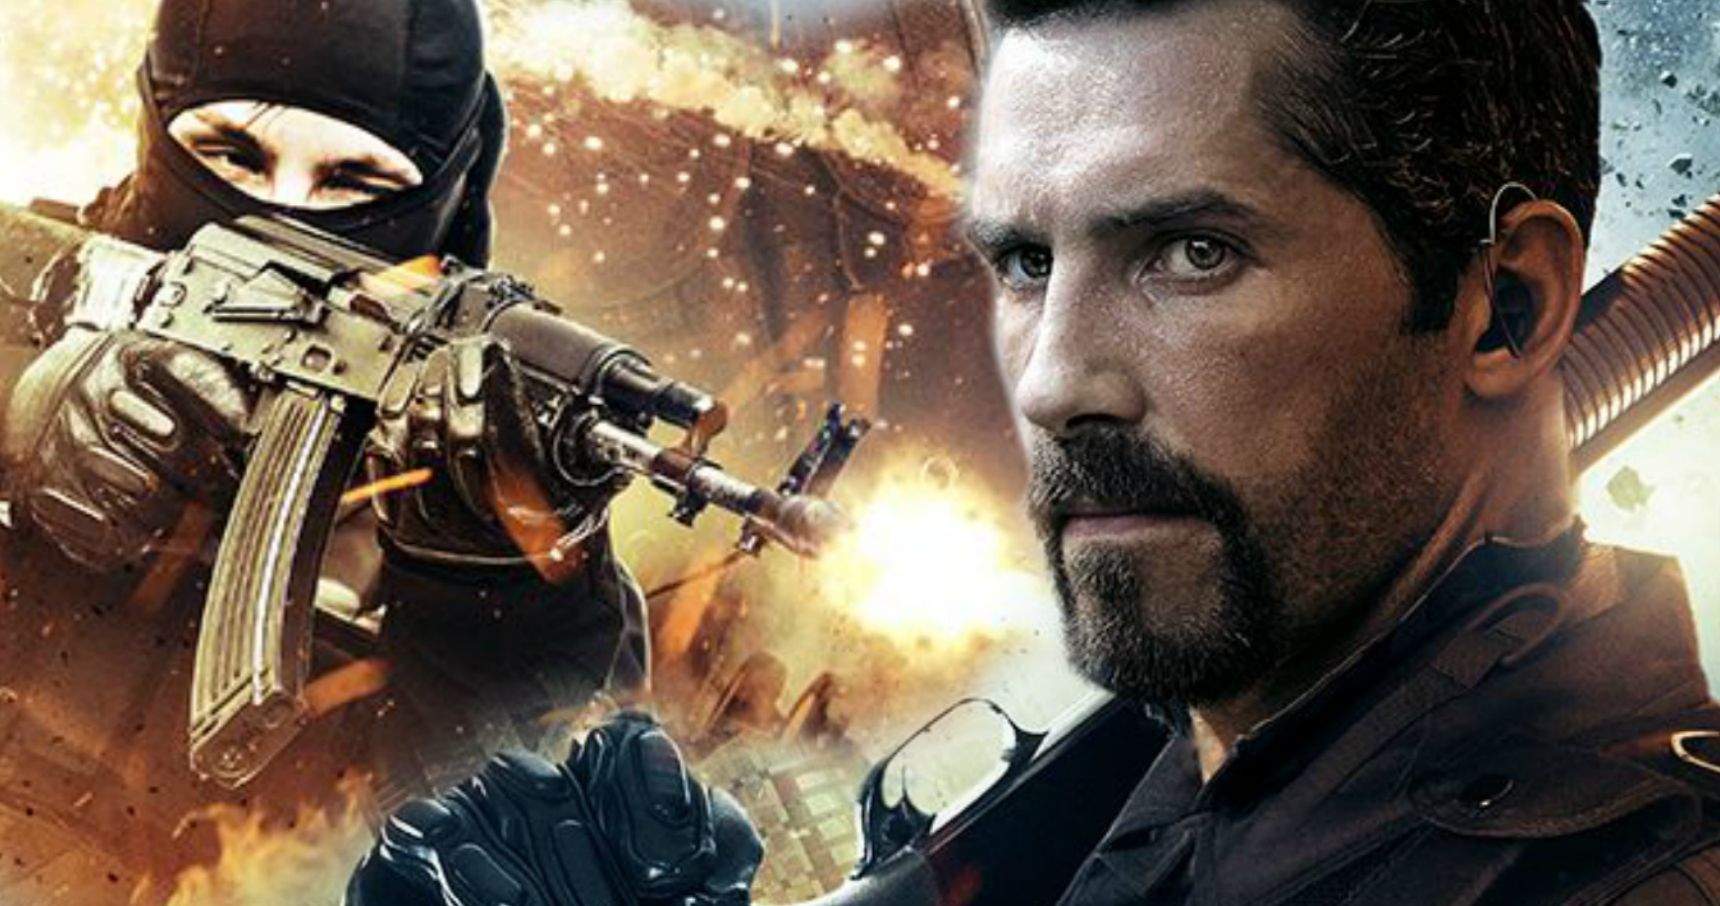 Seized Trailer Teams Scott Adkins and Mario Van Peebles in an '80s Action Throwback